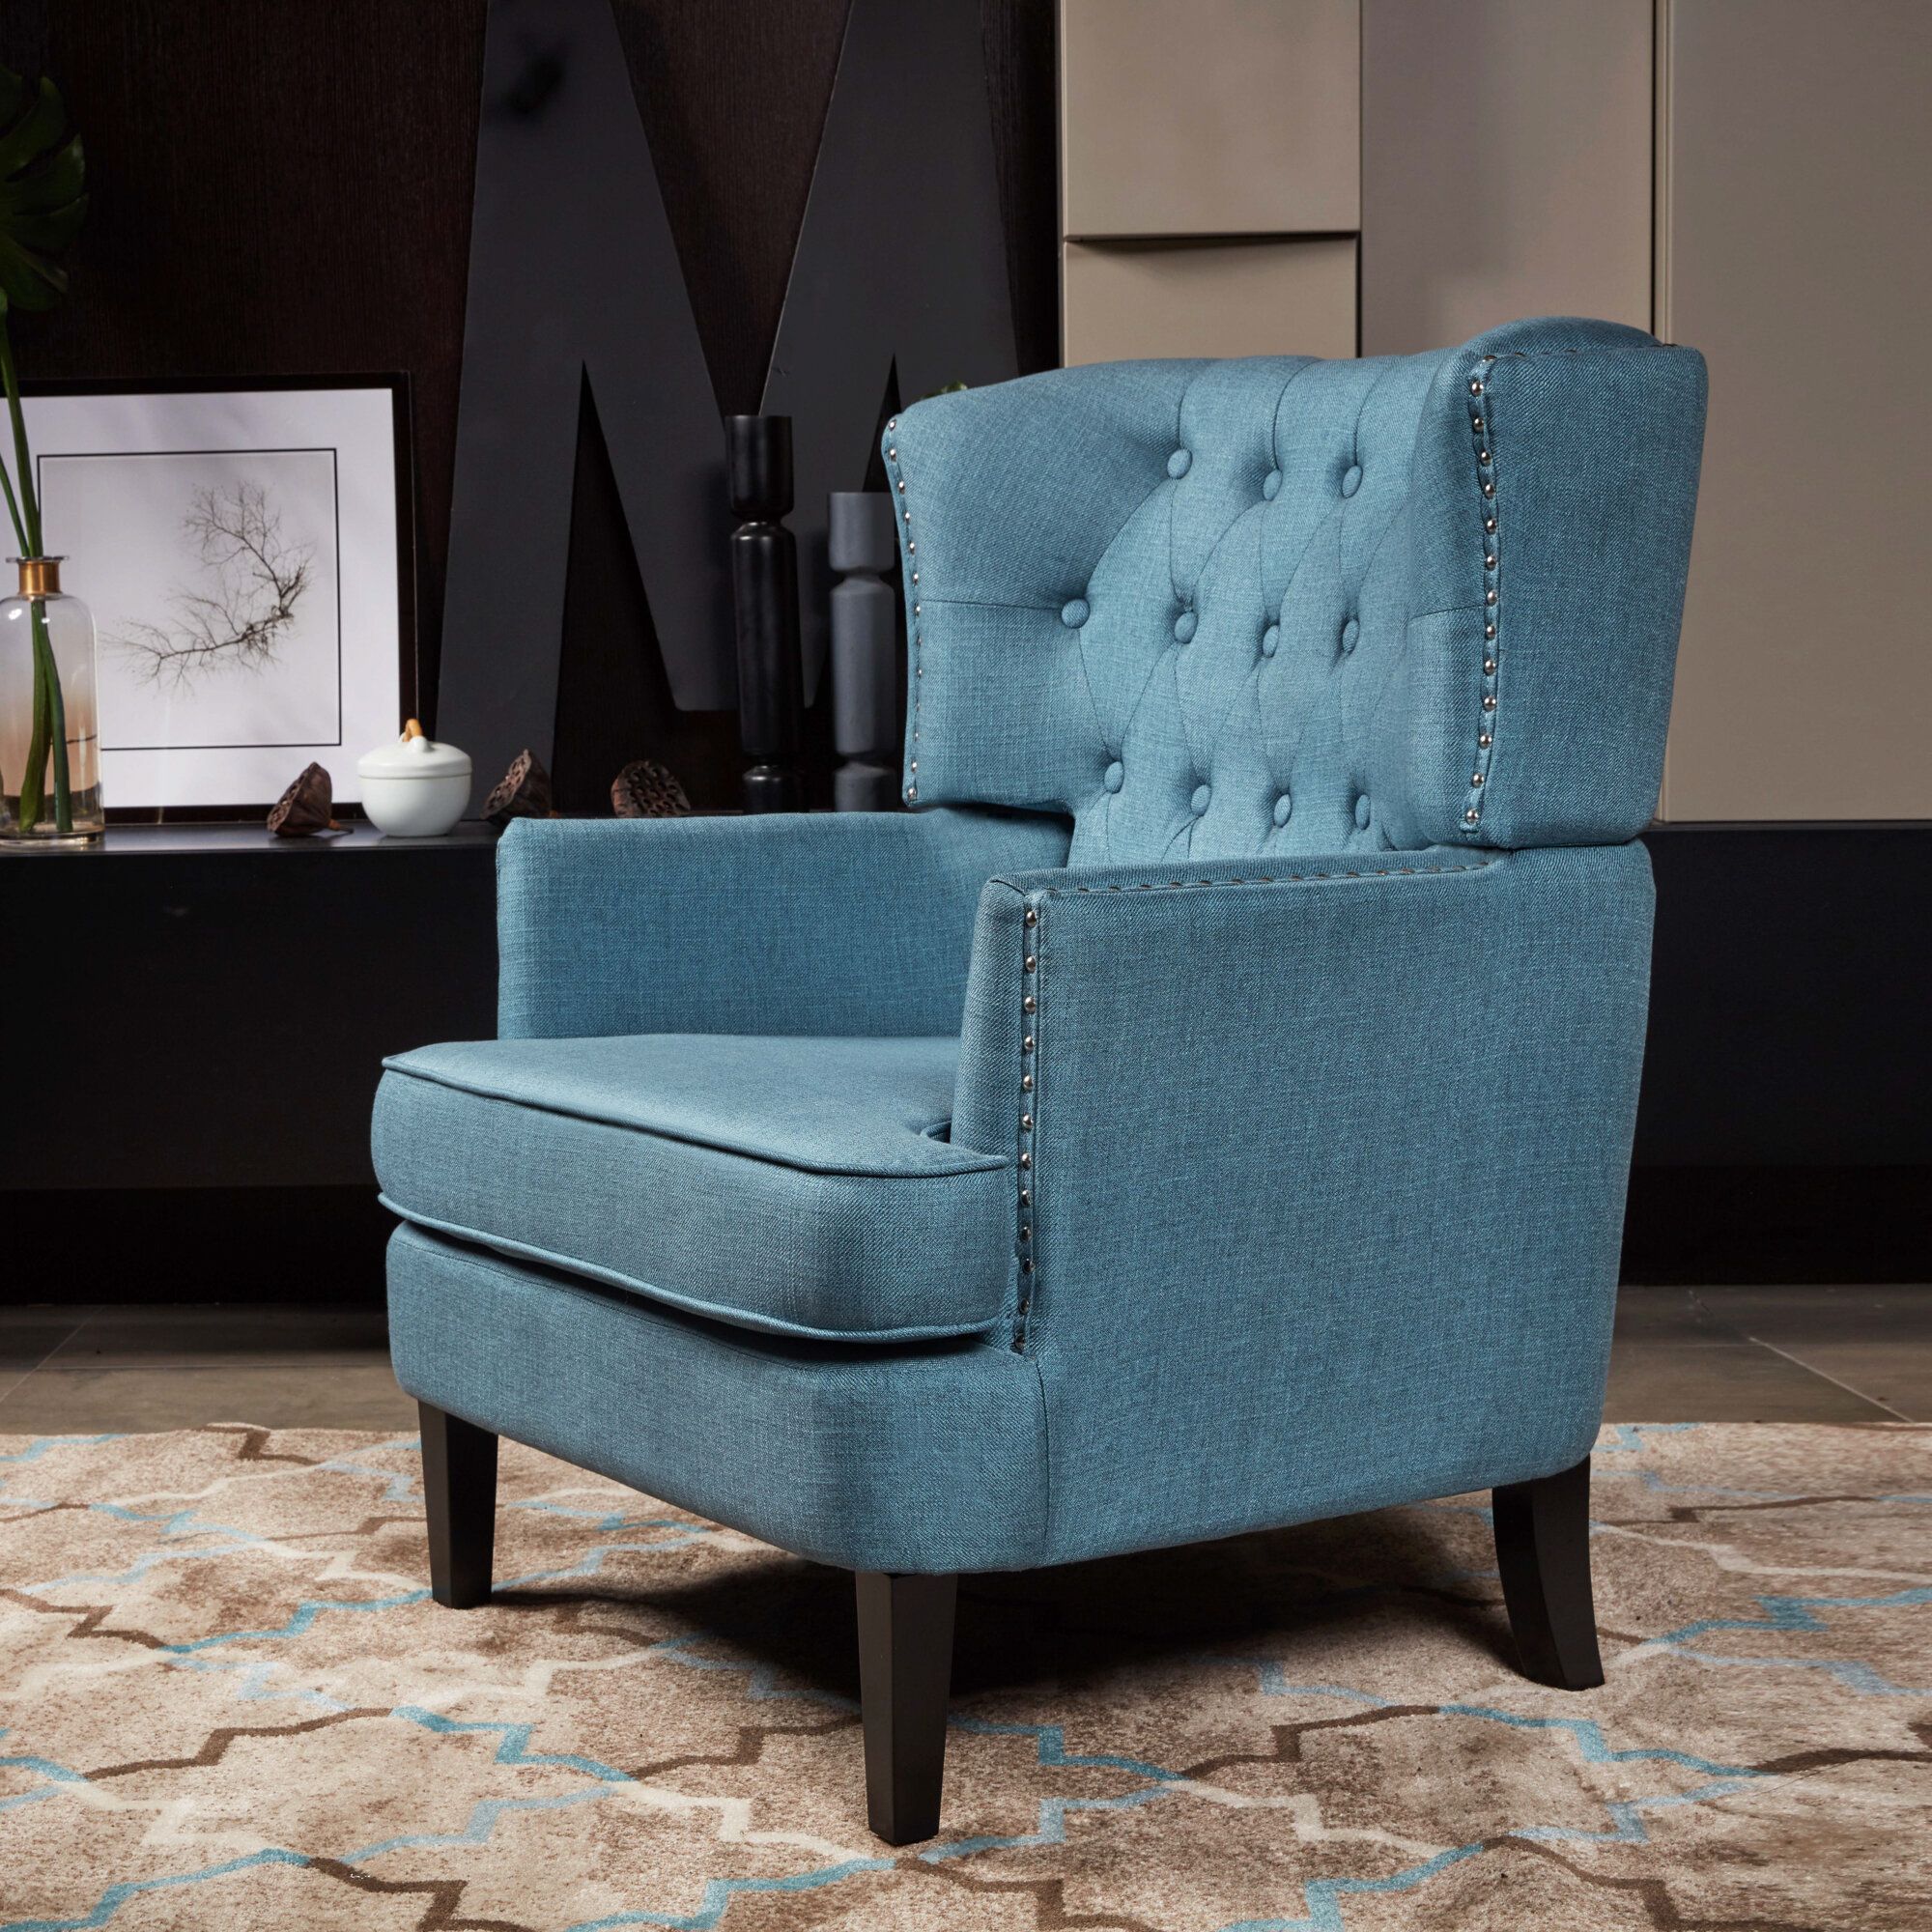 Tufted Wingback Accent Chairs You'Ll Love In 2021 | Wayfair In Galesville Tufted Polyester Wingback Chairs (View 8 of 15)